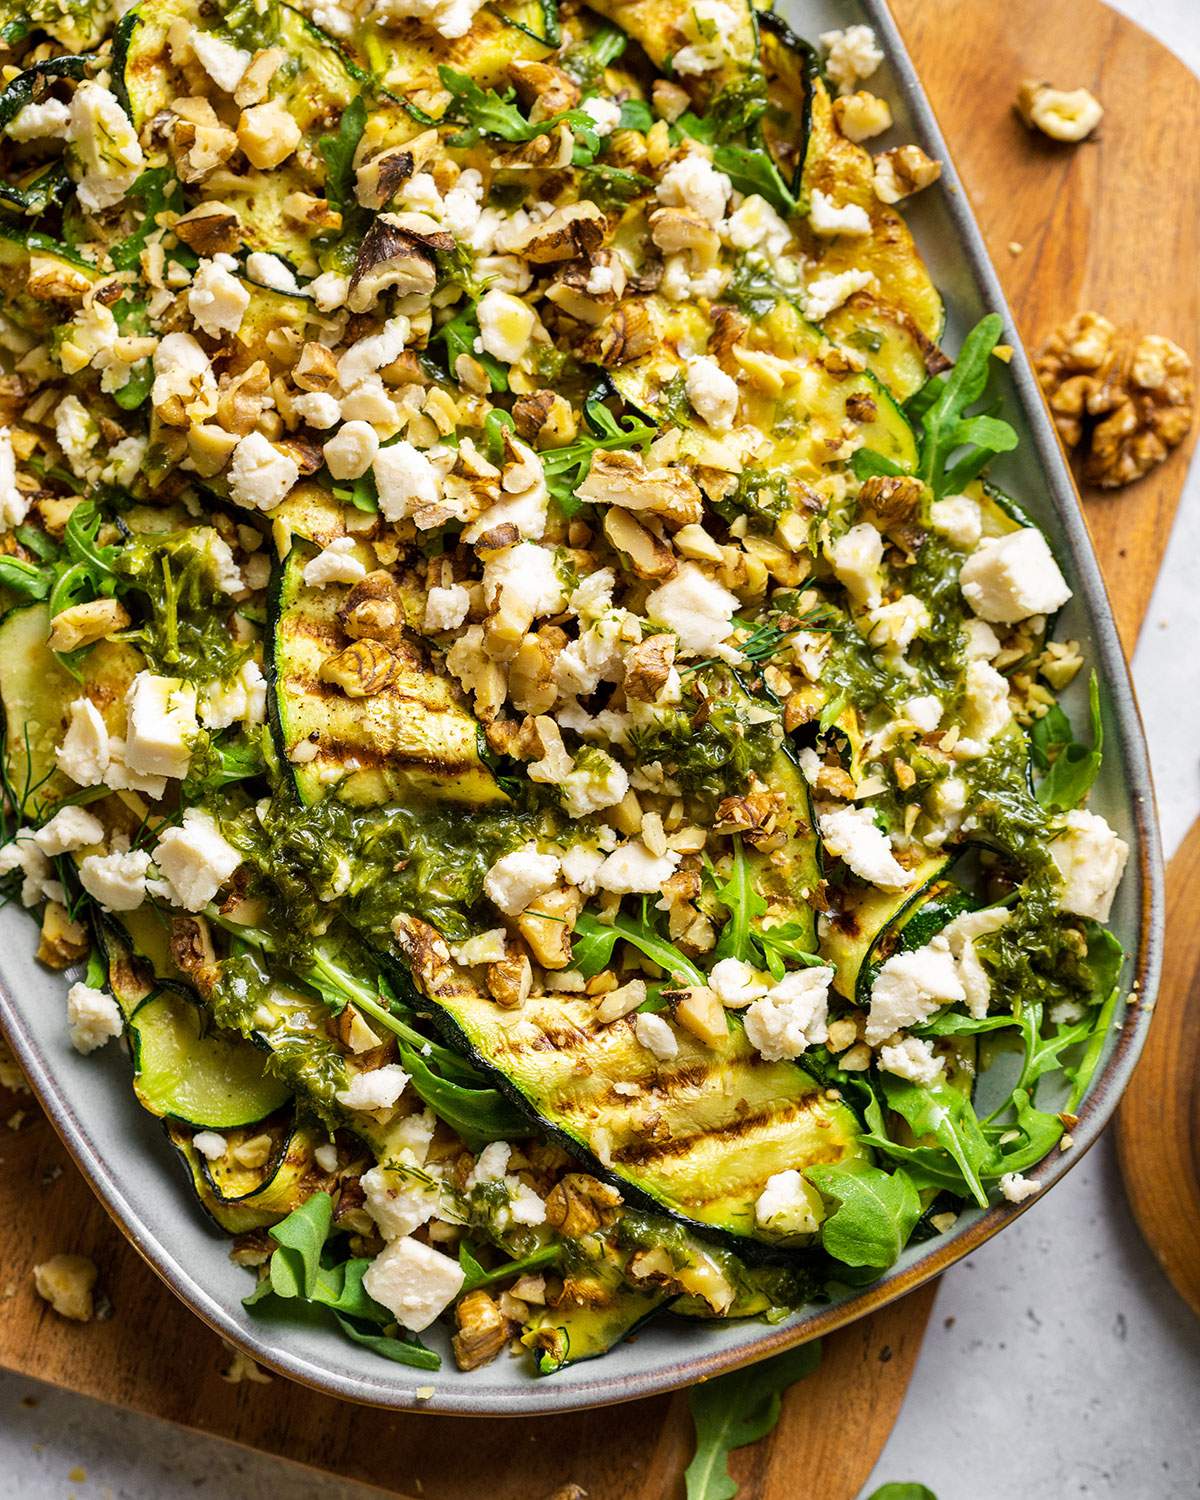 Vegan Grilled Zucchini Salad with walnuts and vegan feta crumbles on a serving platter, shown up close.